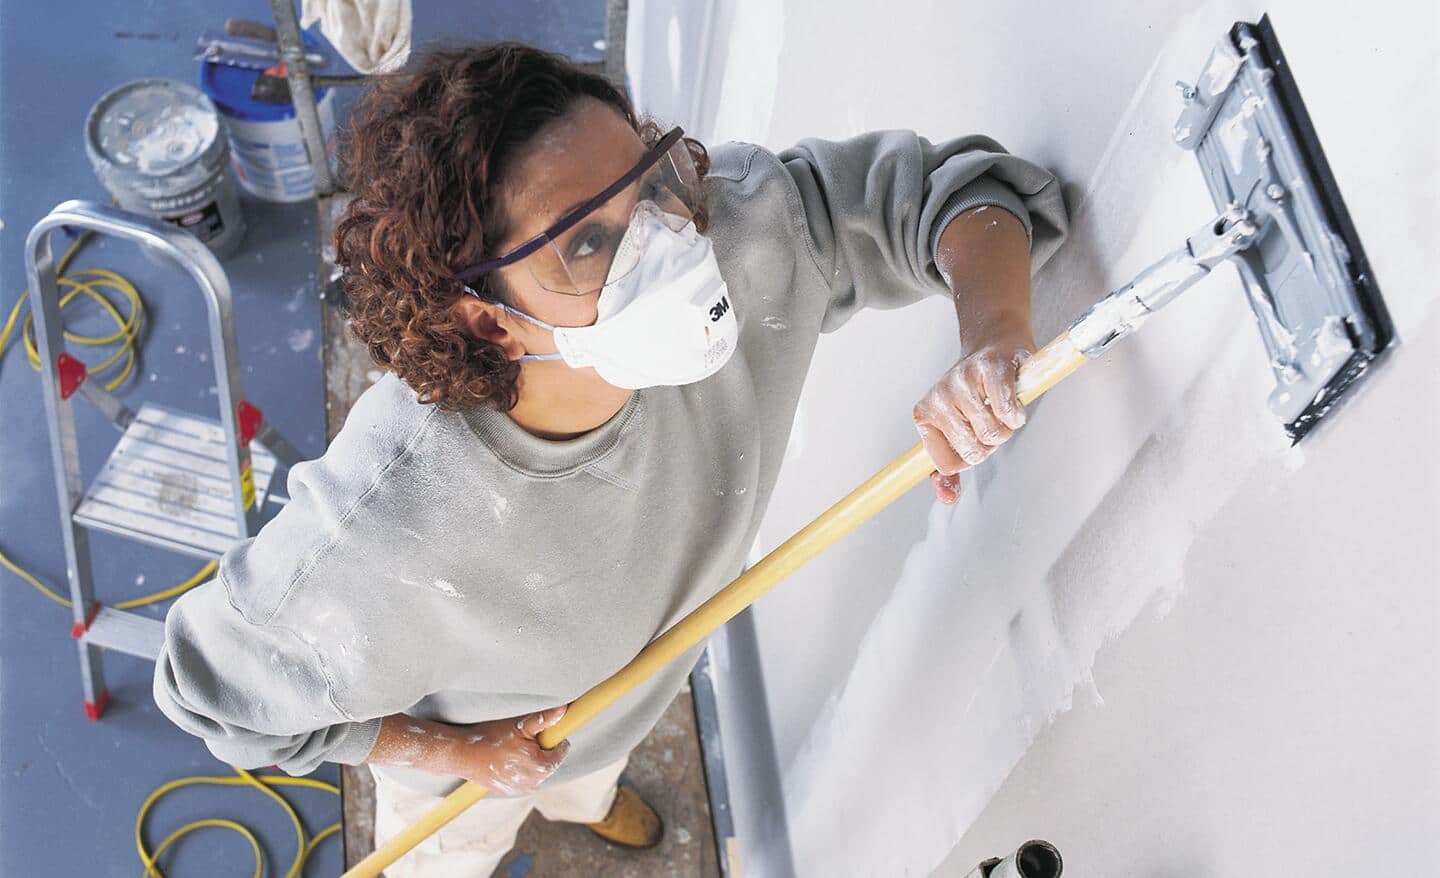 A woman uses drywall screen on an extension handle.